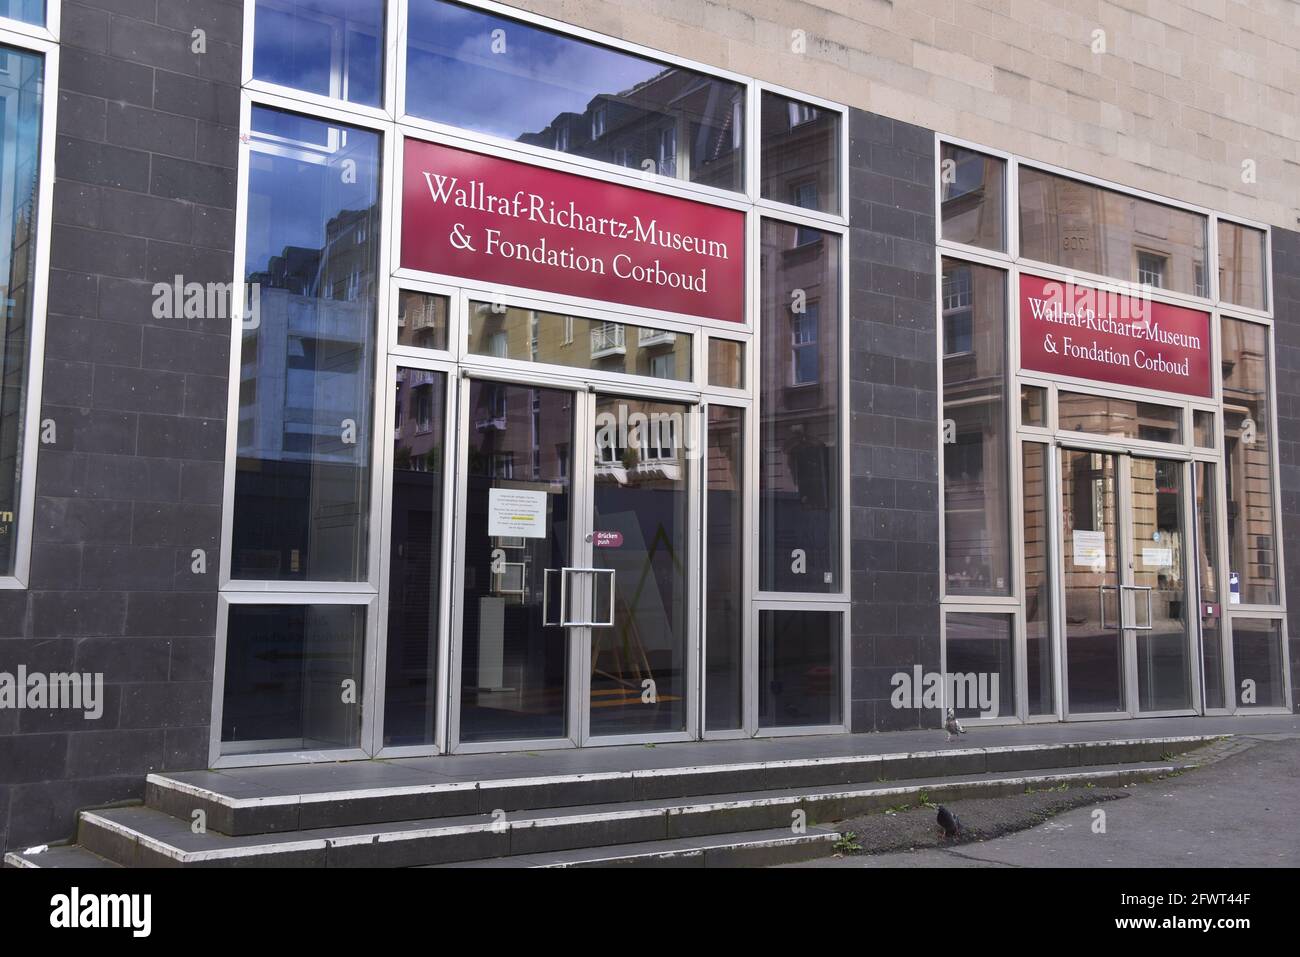 Cologne, Germany. 23rd May, 2021. Entrance to the Wallraf-Richartz-Museum & Fondation Corboud in Cologne, one of the great classical painting galleries in Germany. Credit: Horst Galuschka/dpa/Alamy Live News Stock Photo